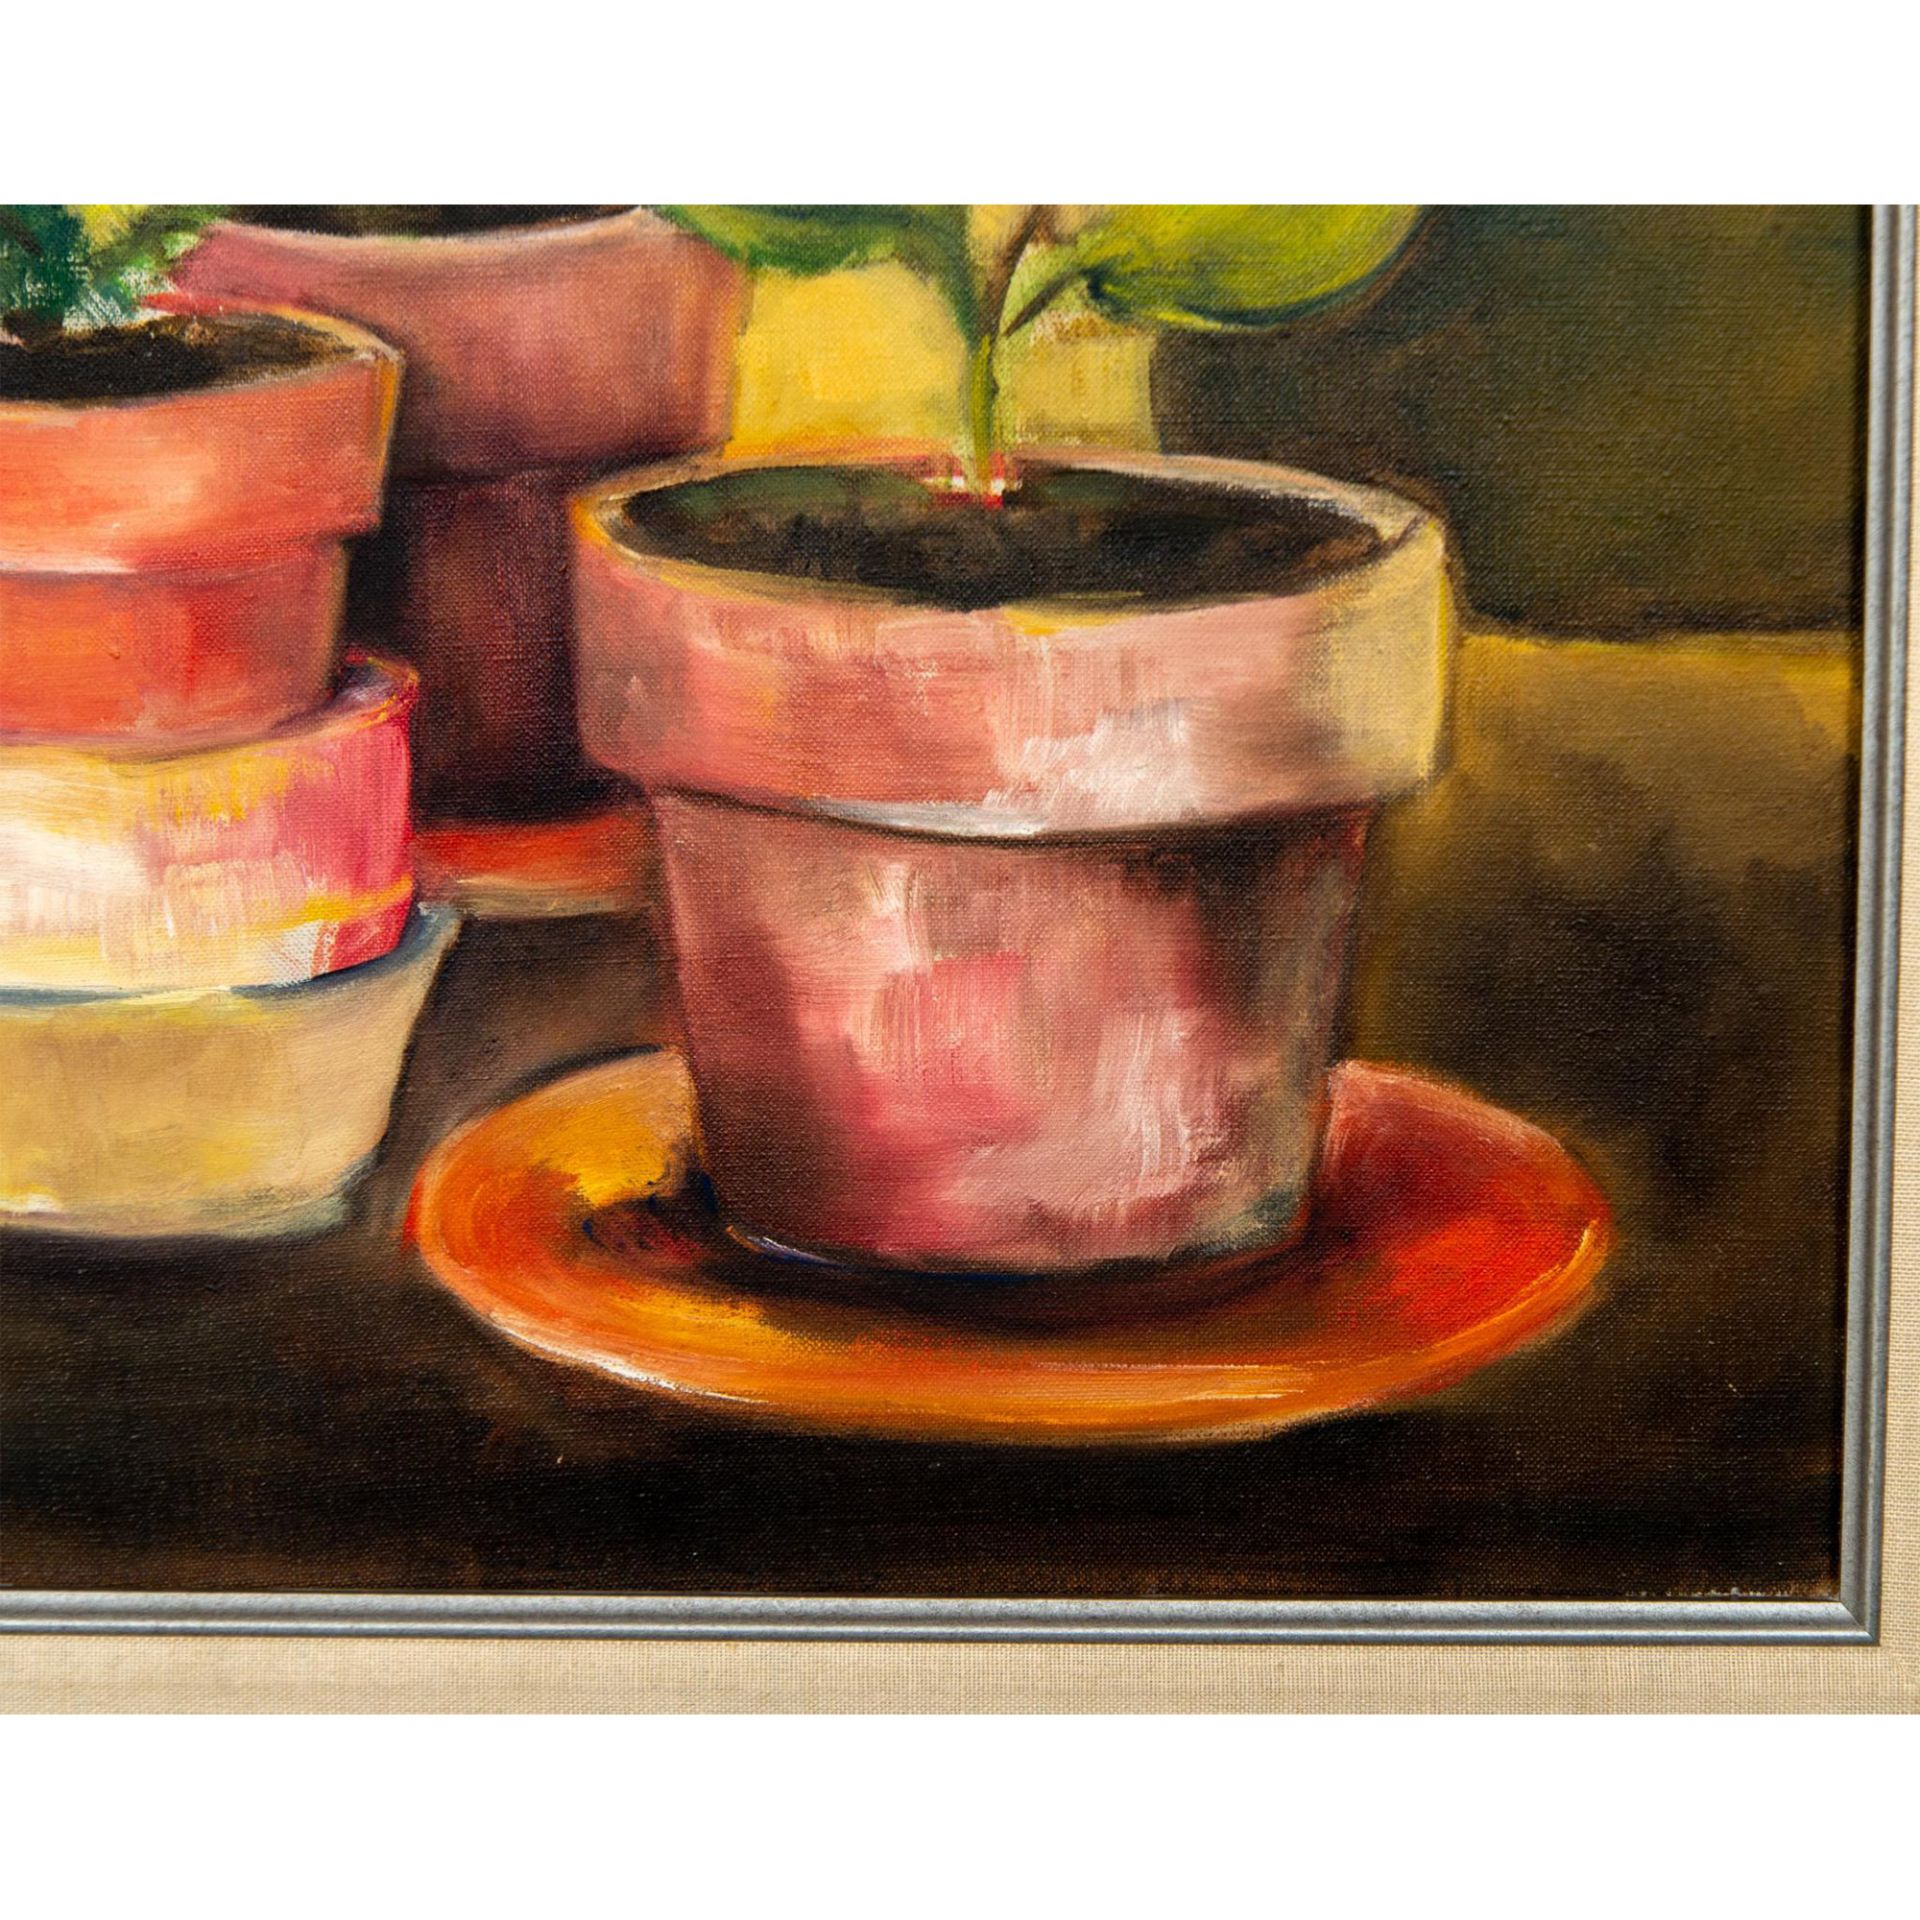 Vintage Oil Painting on Canvas, Still Life - Image 4 of 6